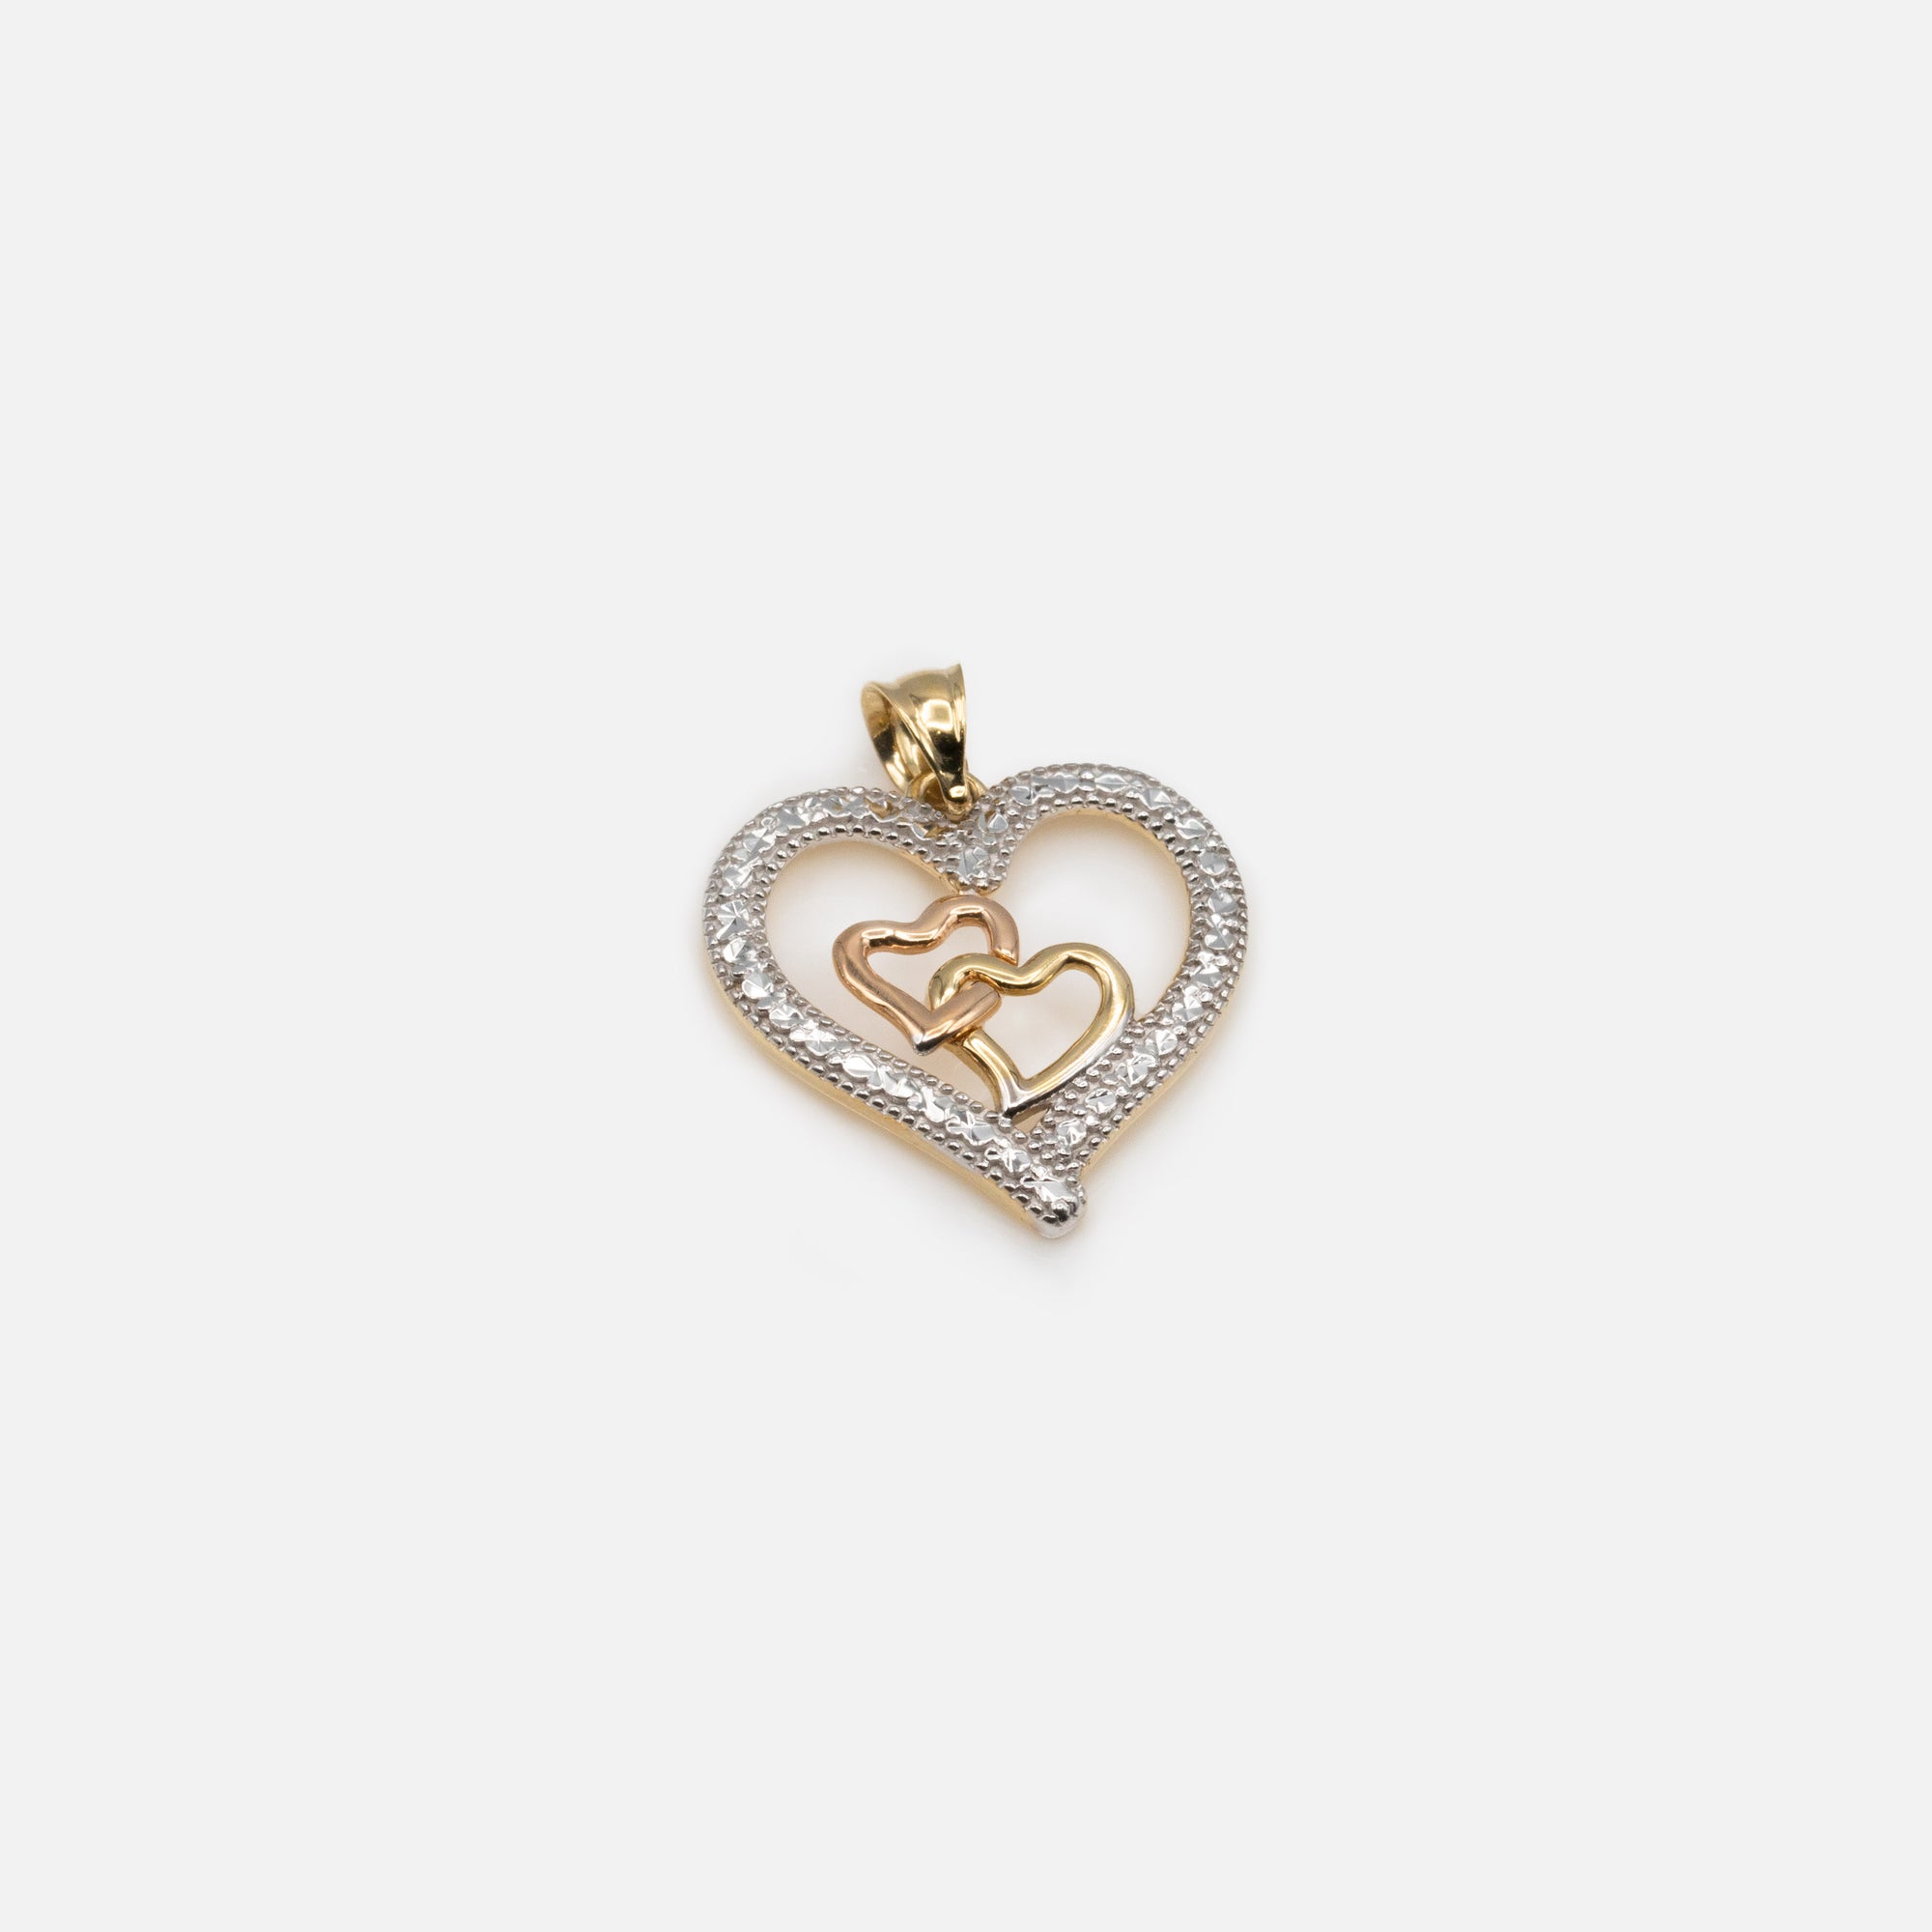 Inseparable Hearts Charm with Cubic Zirconia in 10k Gold